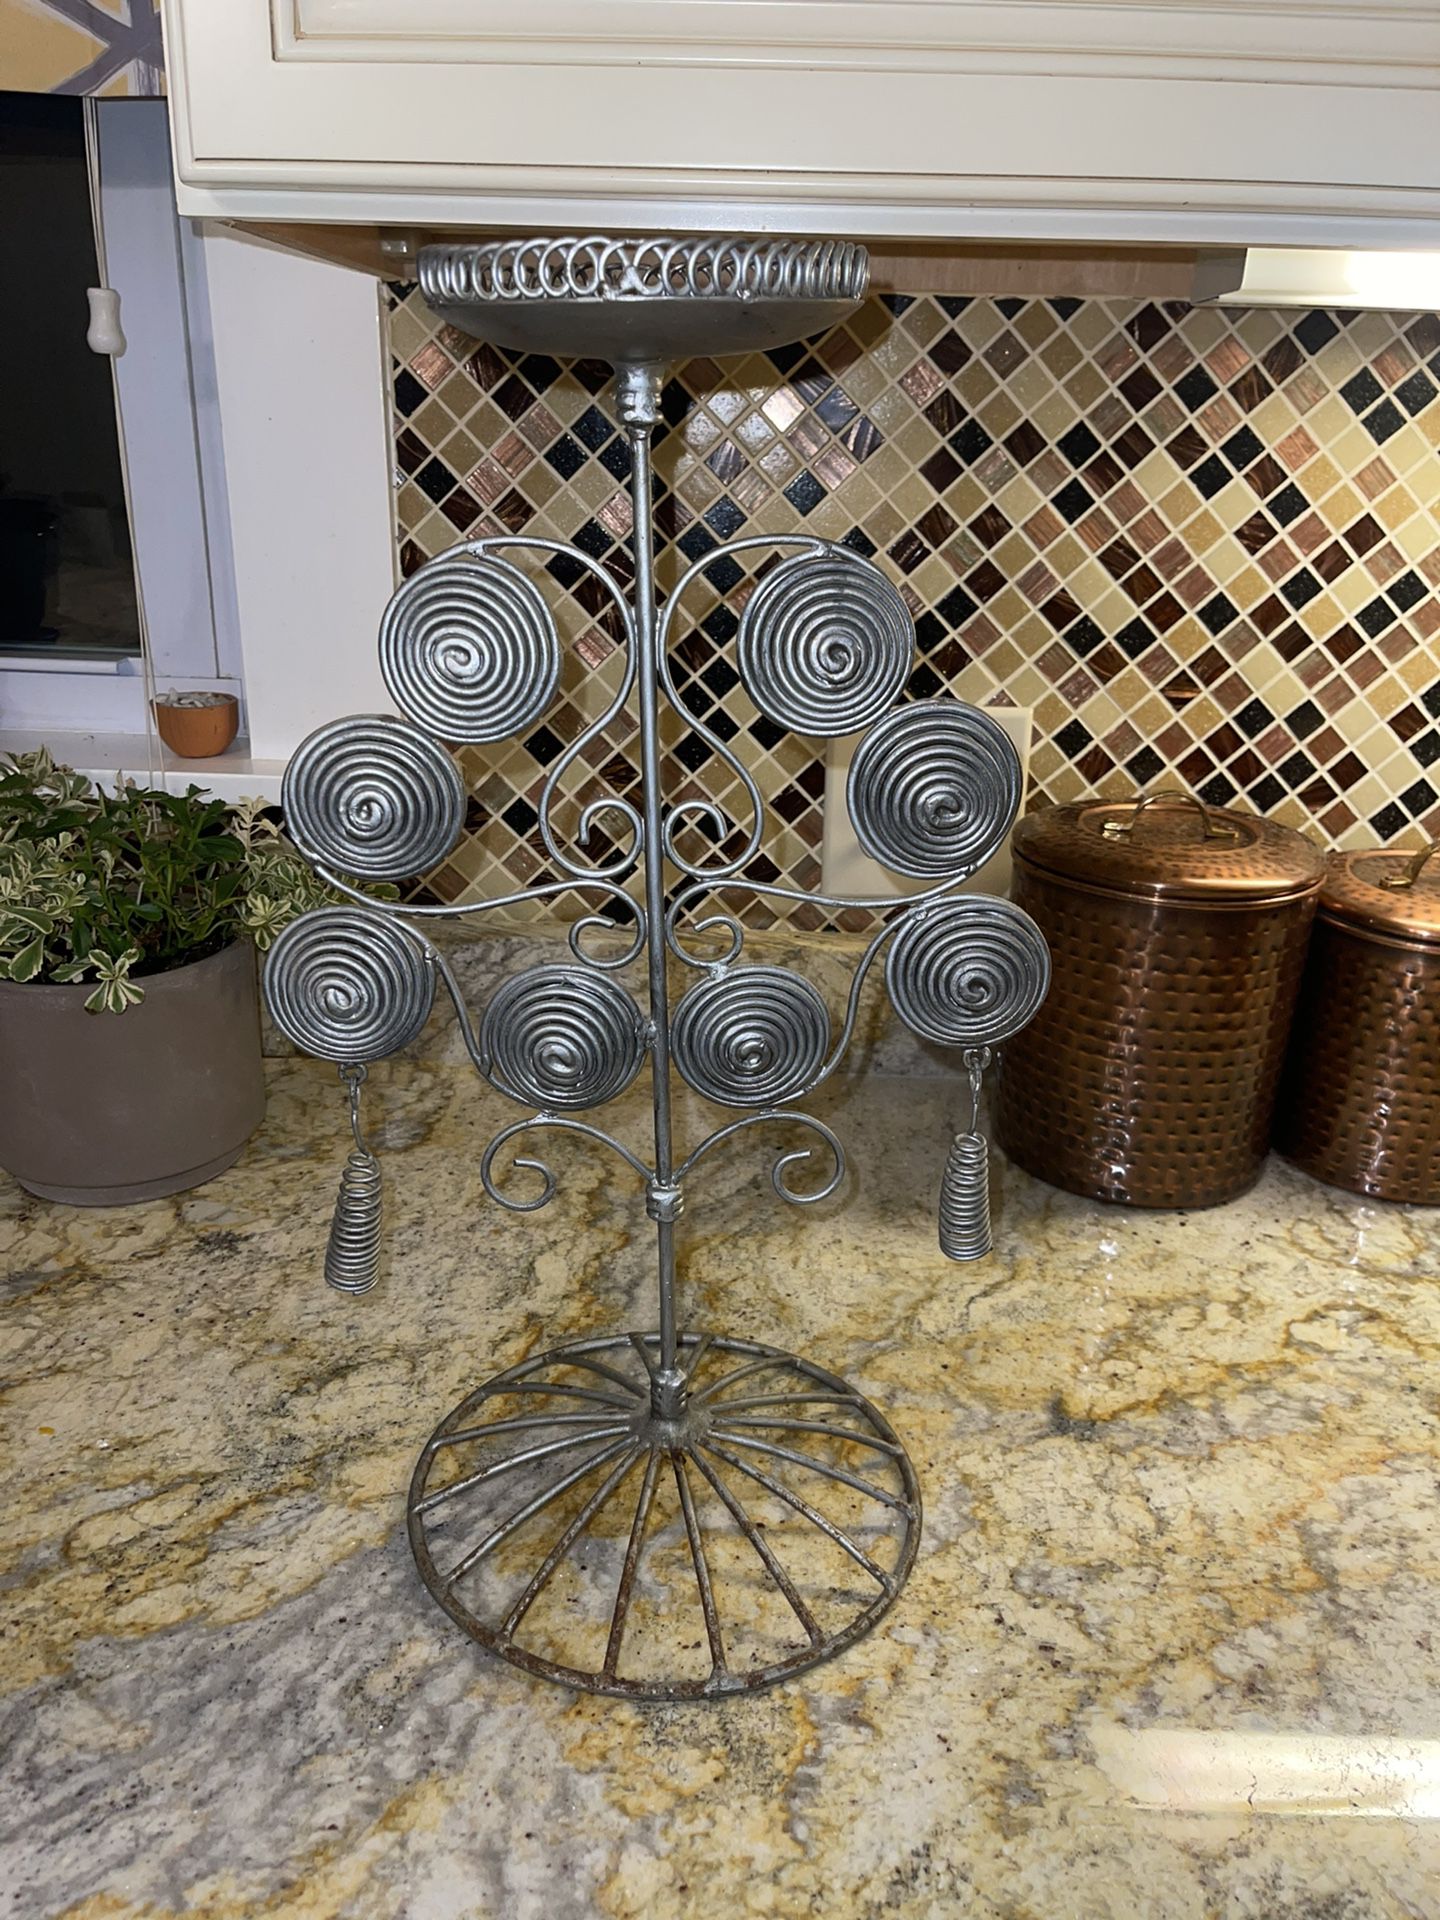 Funky Cool Metal Pillar Candleholder (18” H) Last pic shows some discoloration … Can be painted.